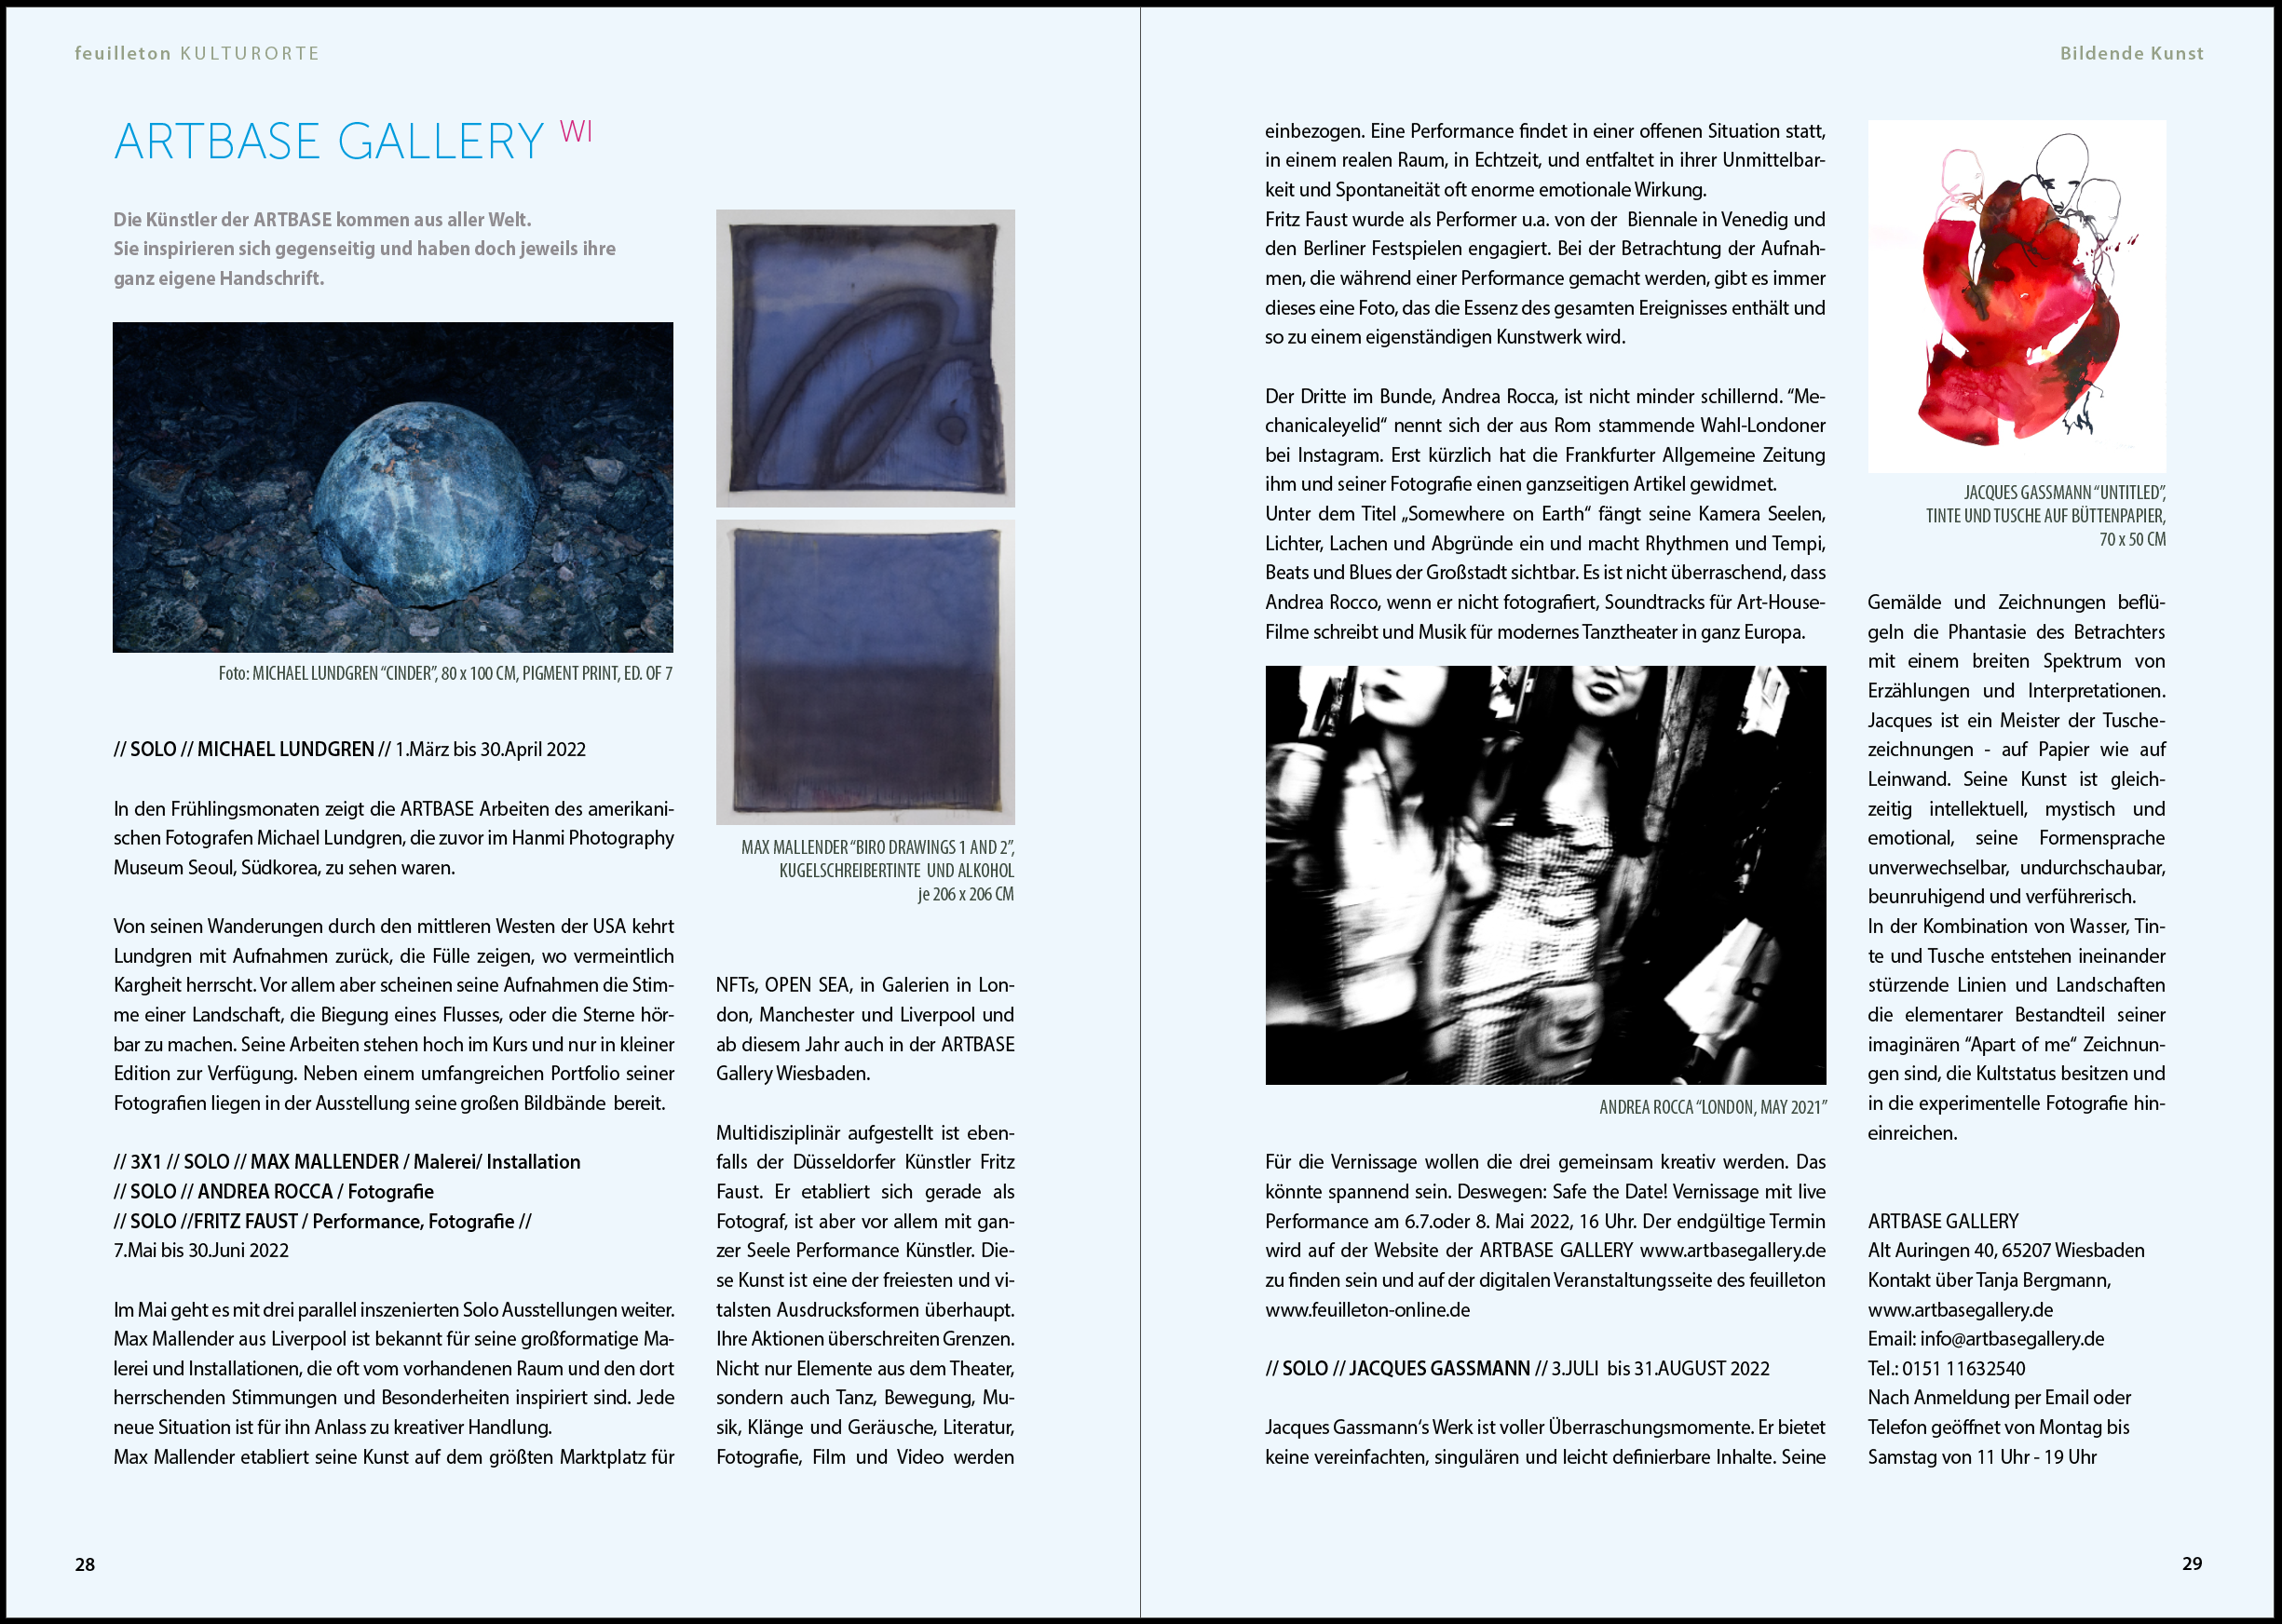 Art magazine feuilleton about the program of ARTBASE Gallery March 2022 until August 2022